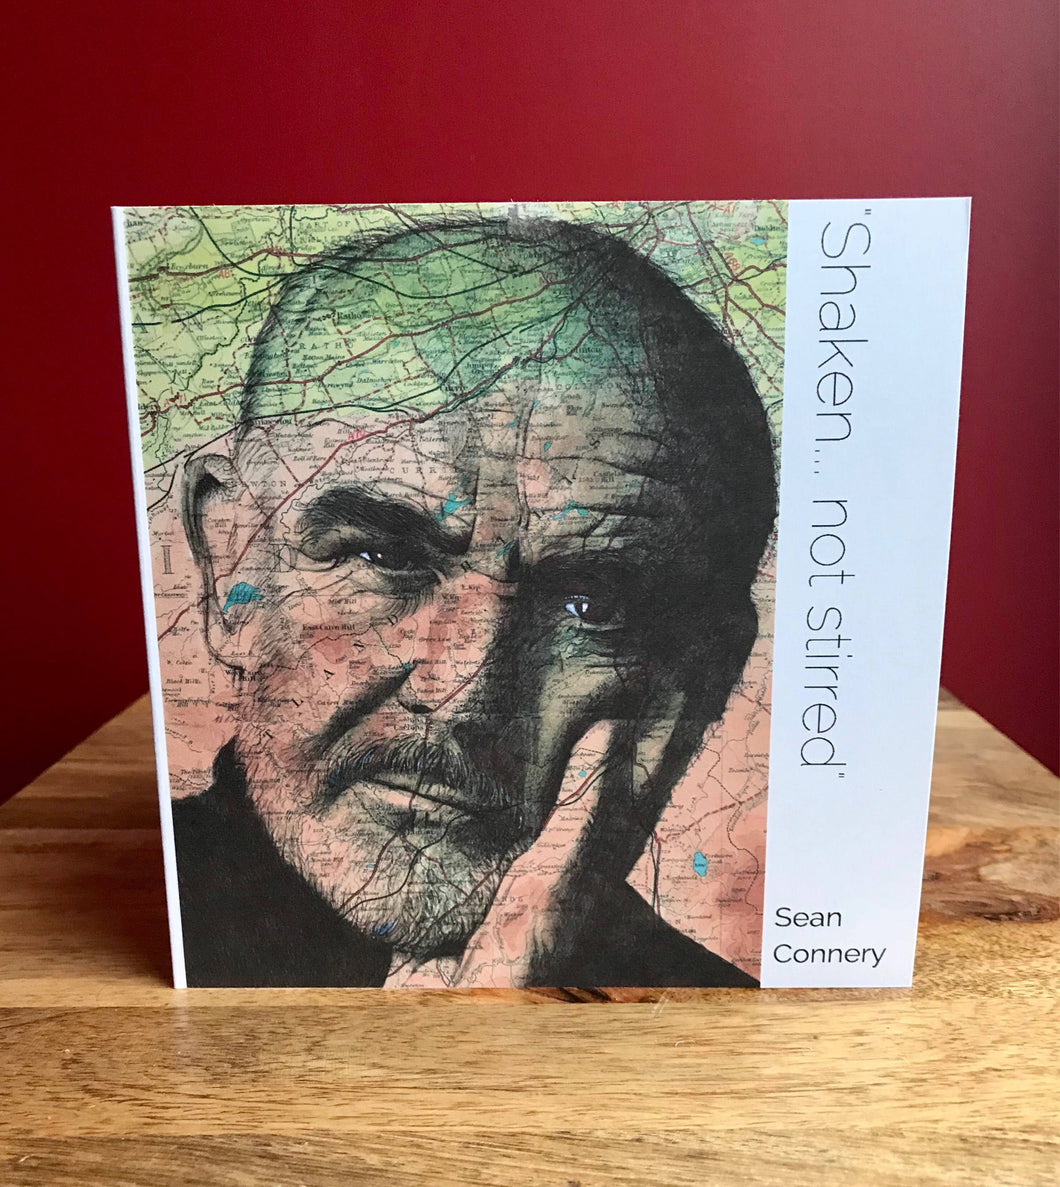 Sean Connery Birthday/ Greeting card. Printed drawing over map. Blank inside